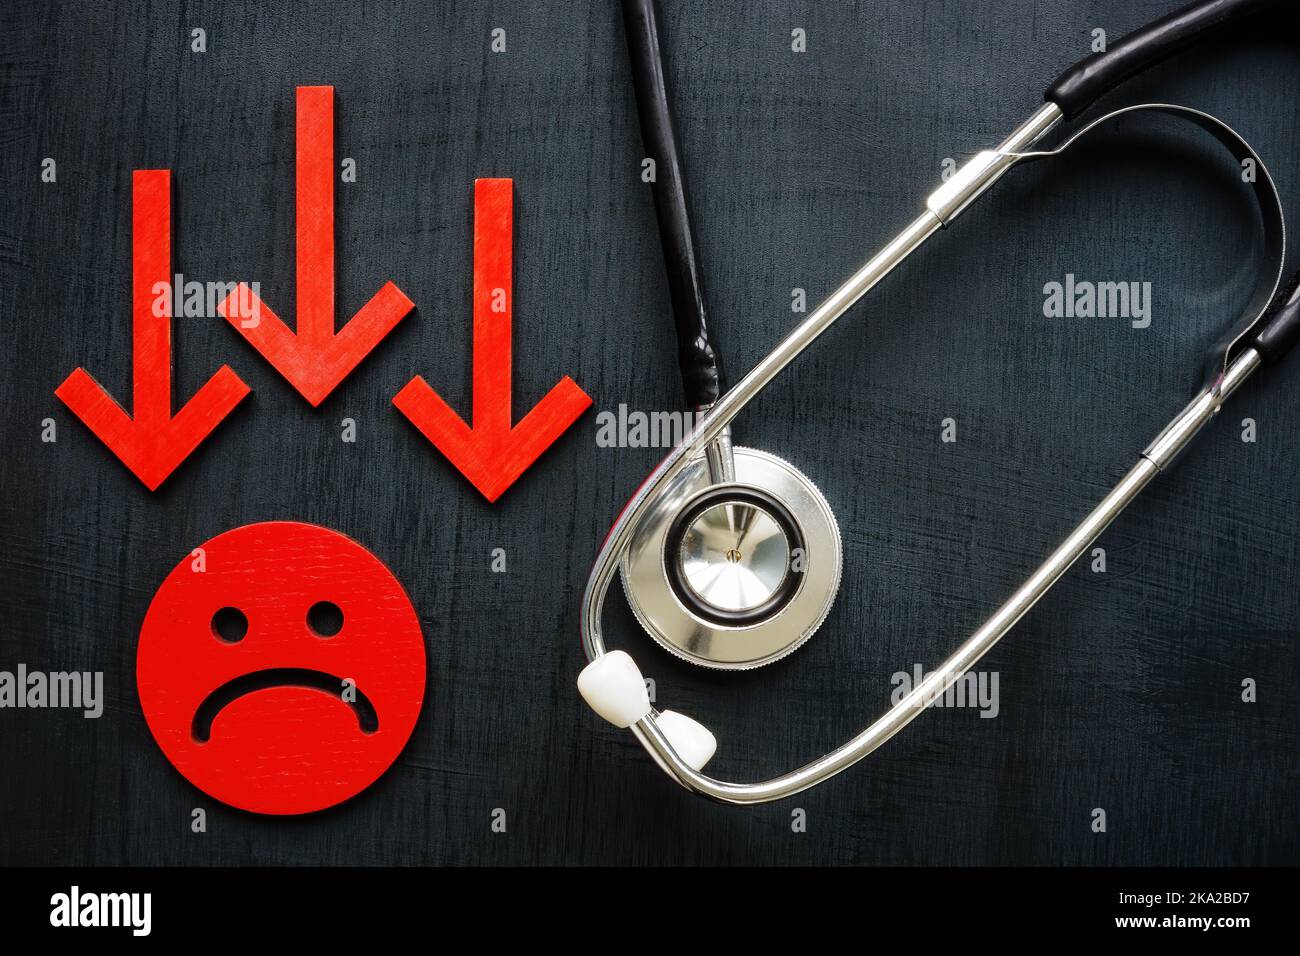 Negative patient experience or satisfaction. Arrows and stethoscope. Stock Photo